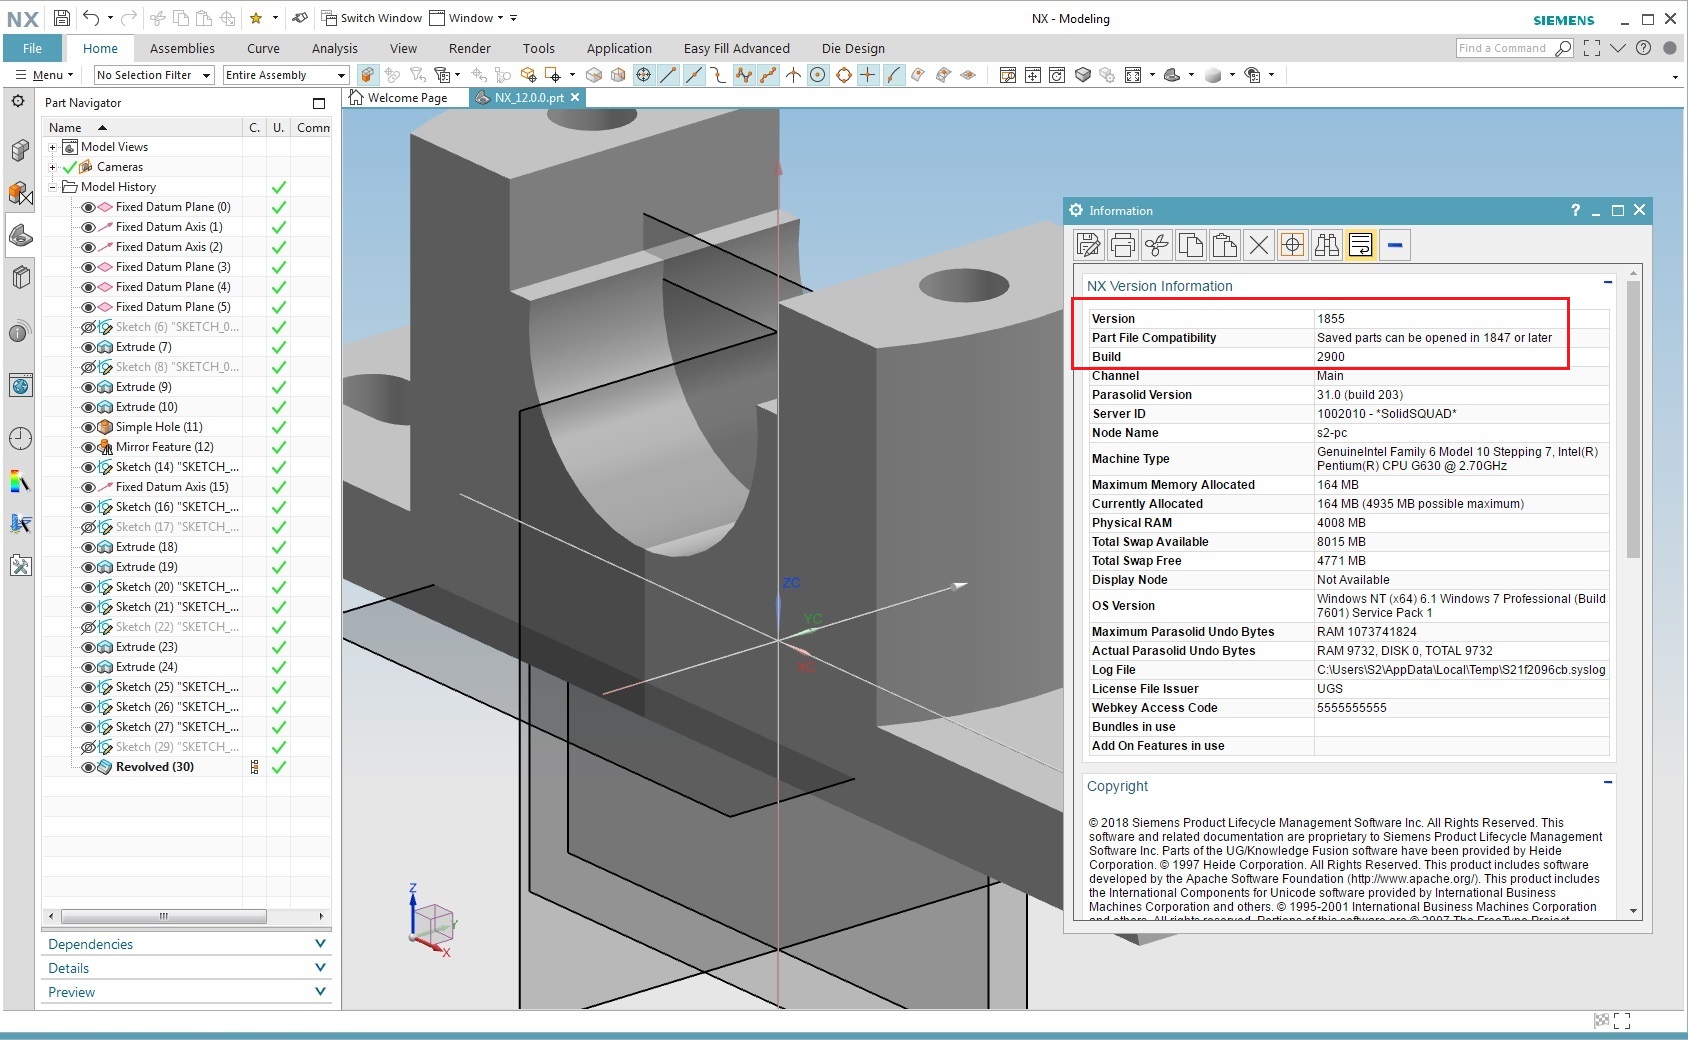 Working with Siemens NX 1855 full license